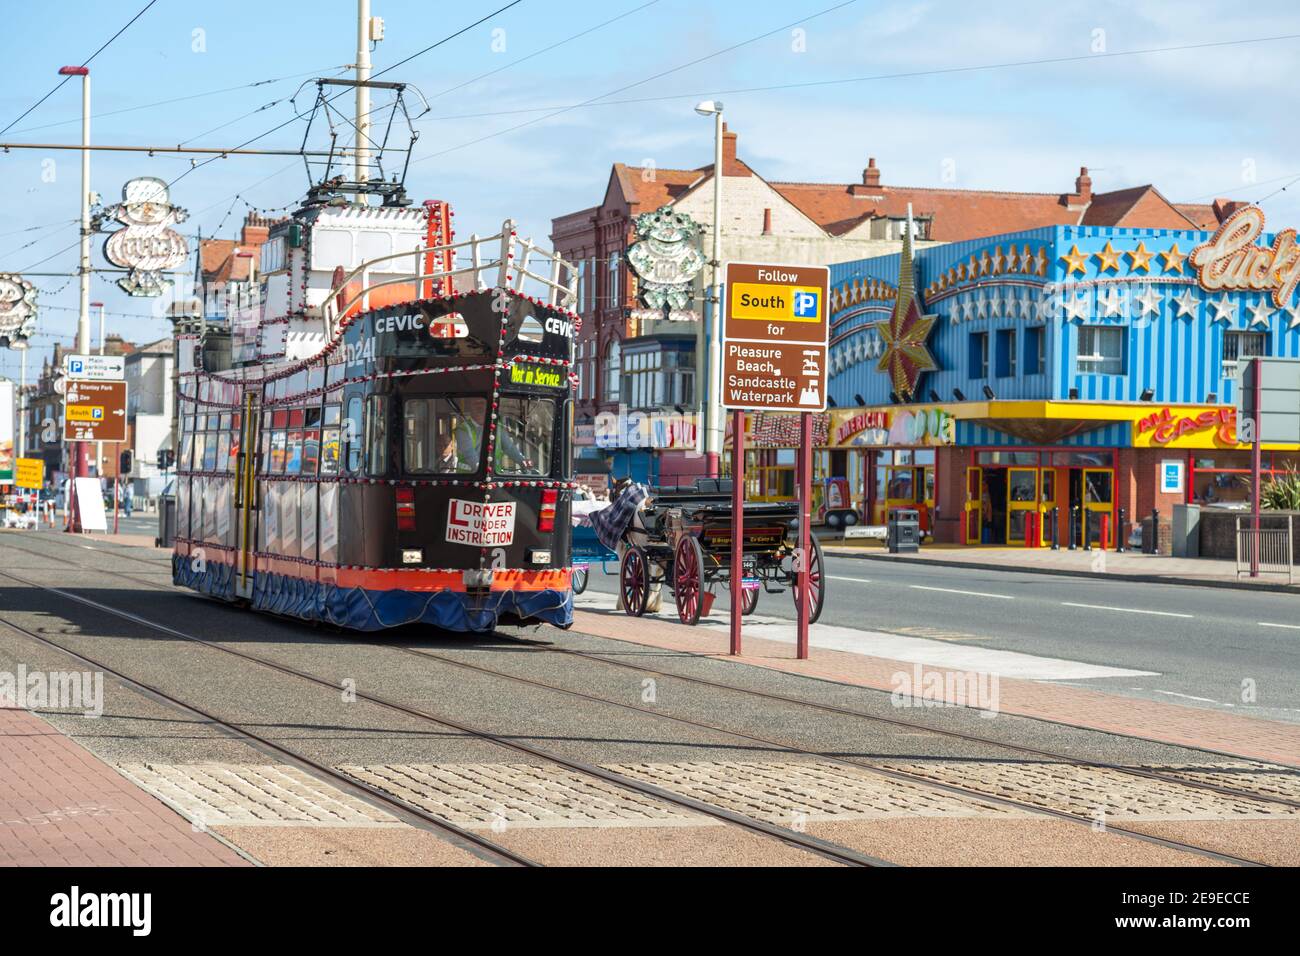 One of Blackpool's famous heritage trams Stock Photo